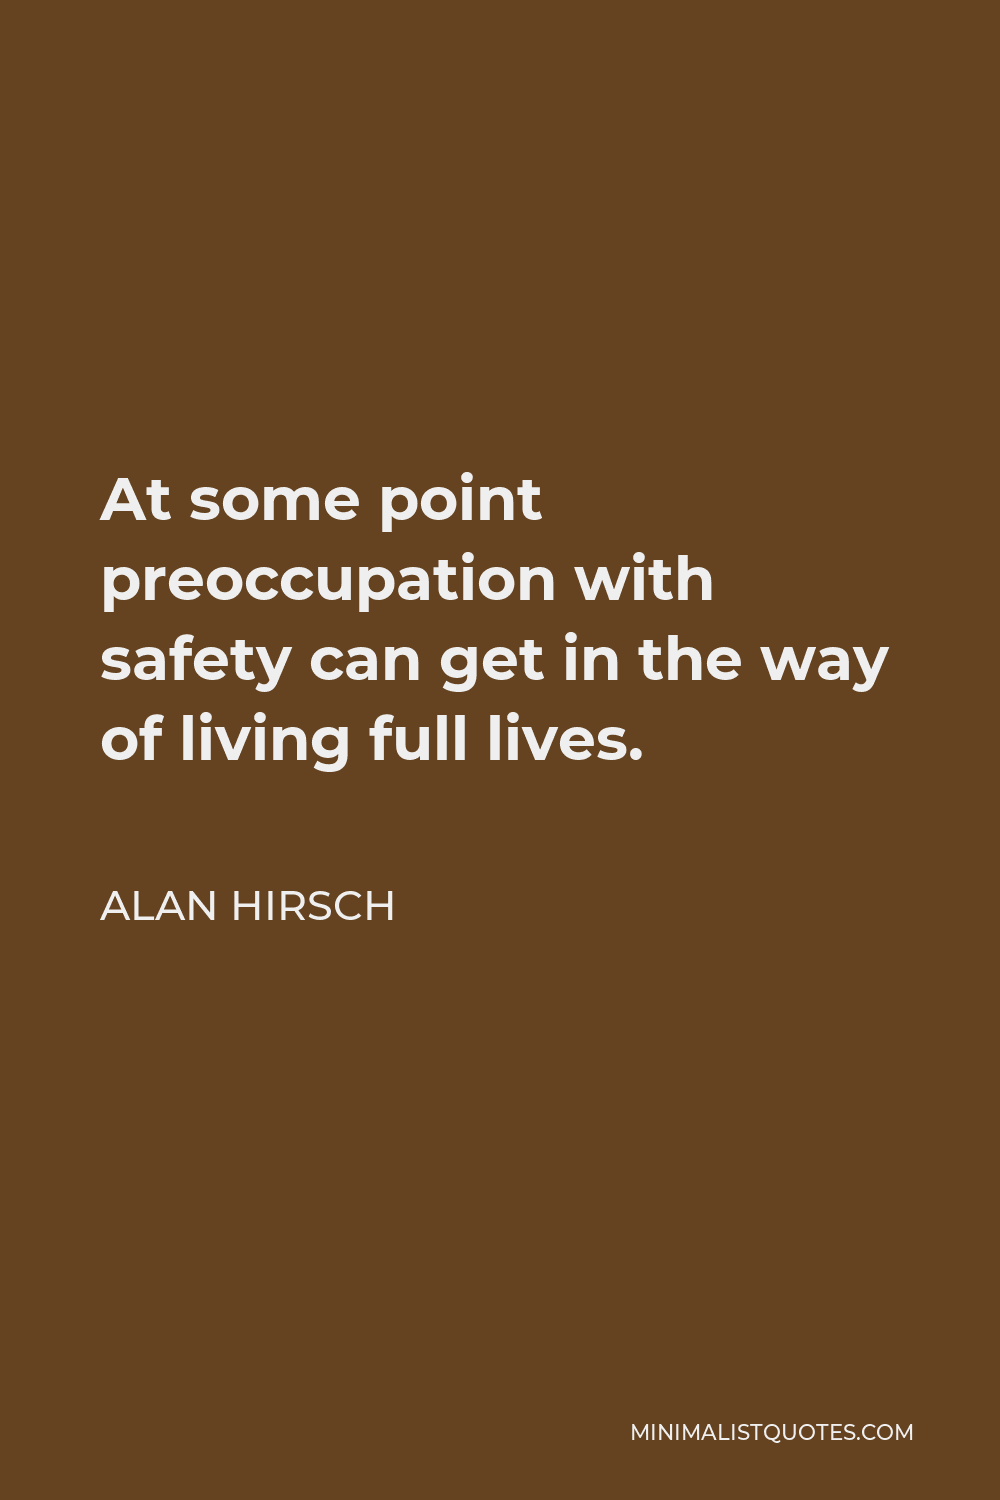 Alan Hirsch Quote - At some point preoccupation with safety can get in the way of living full lives.